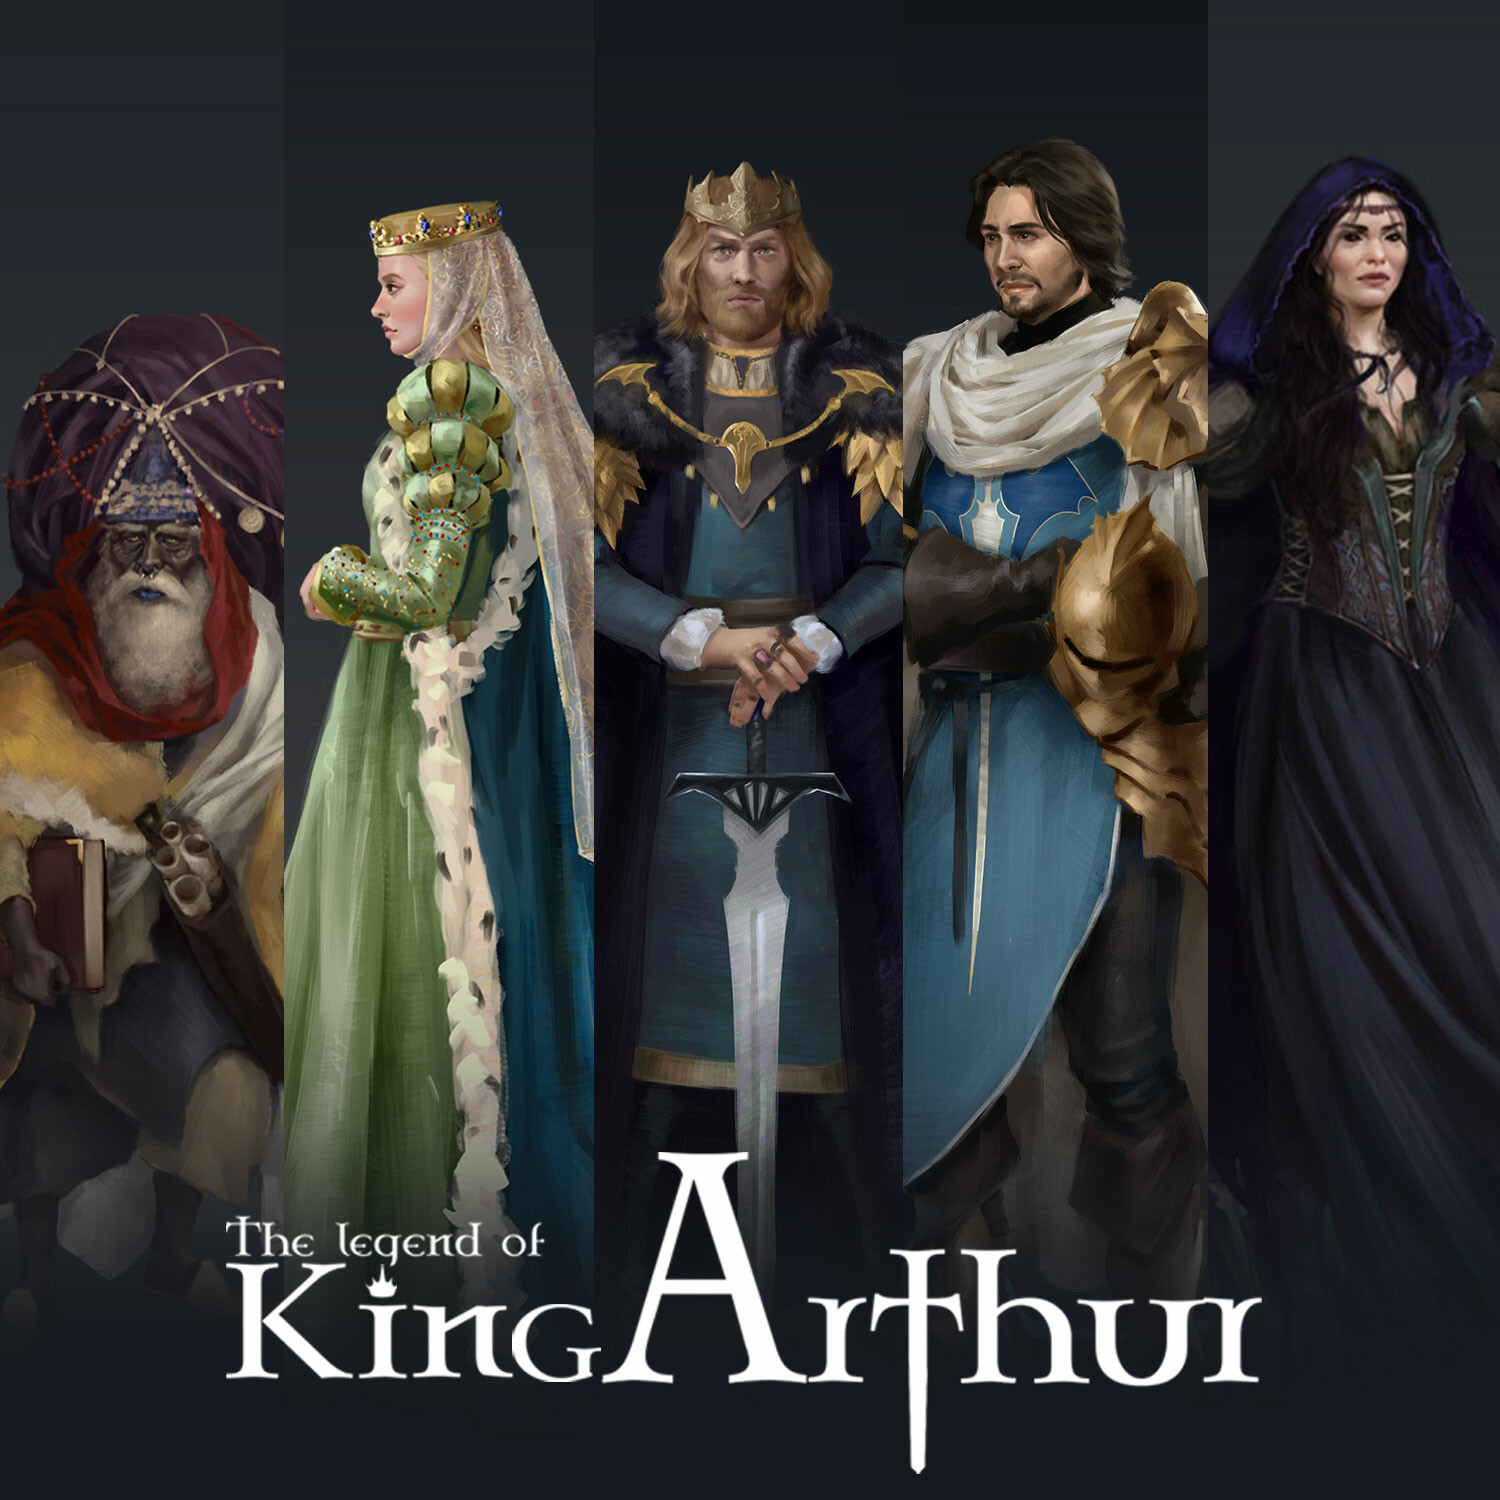 The legend of King Arthur - AS Challenge